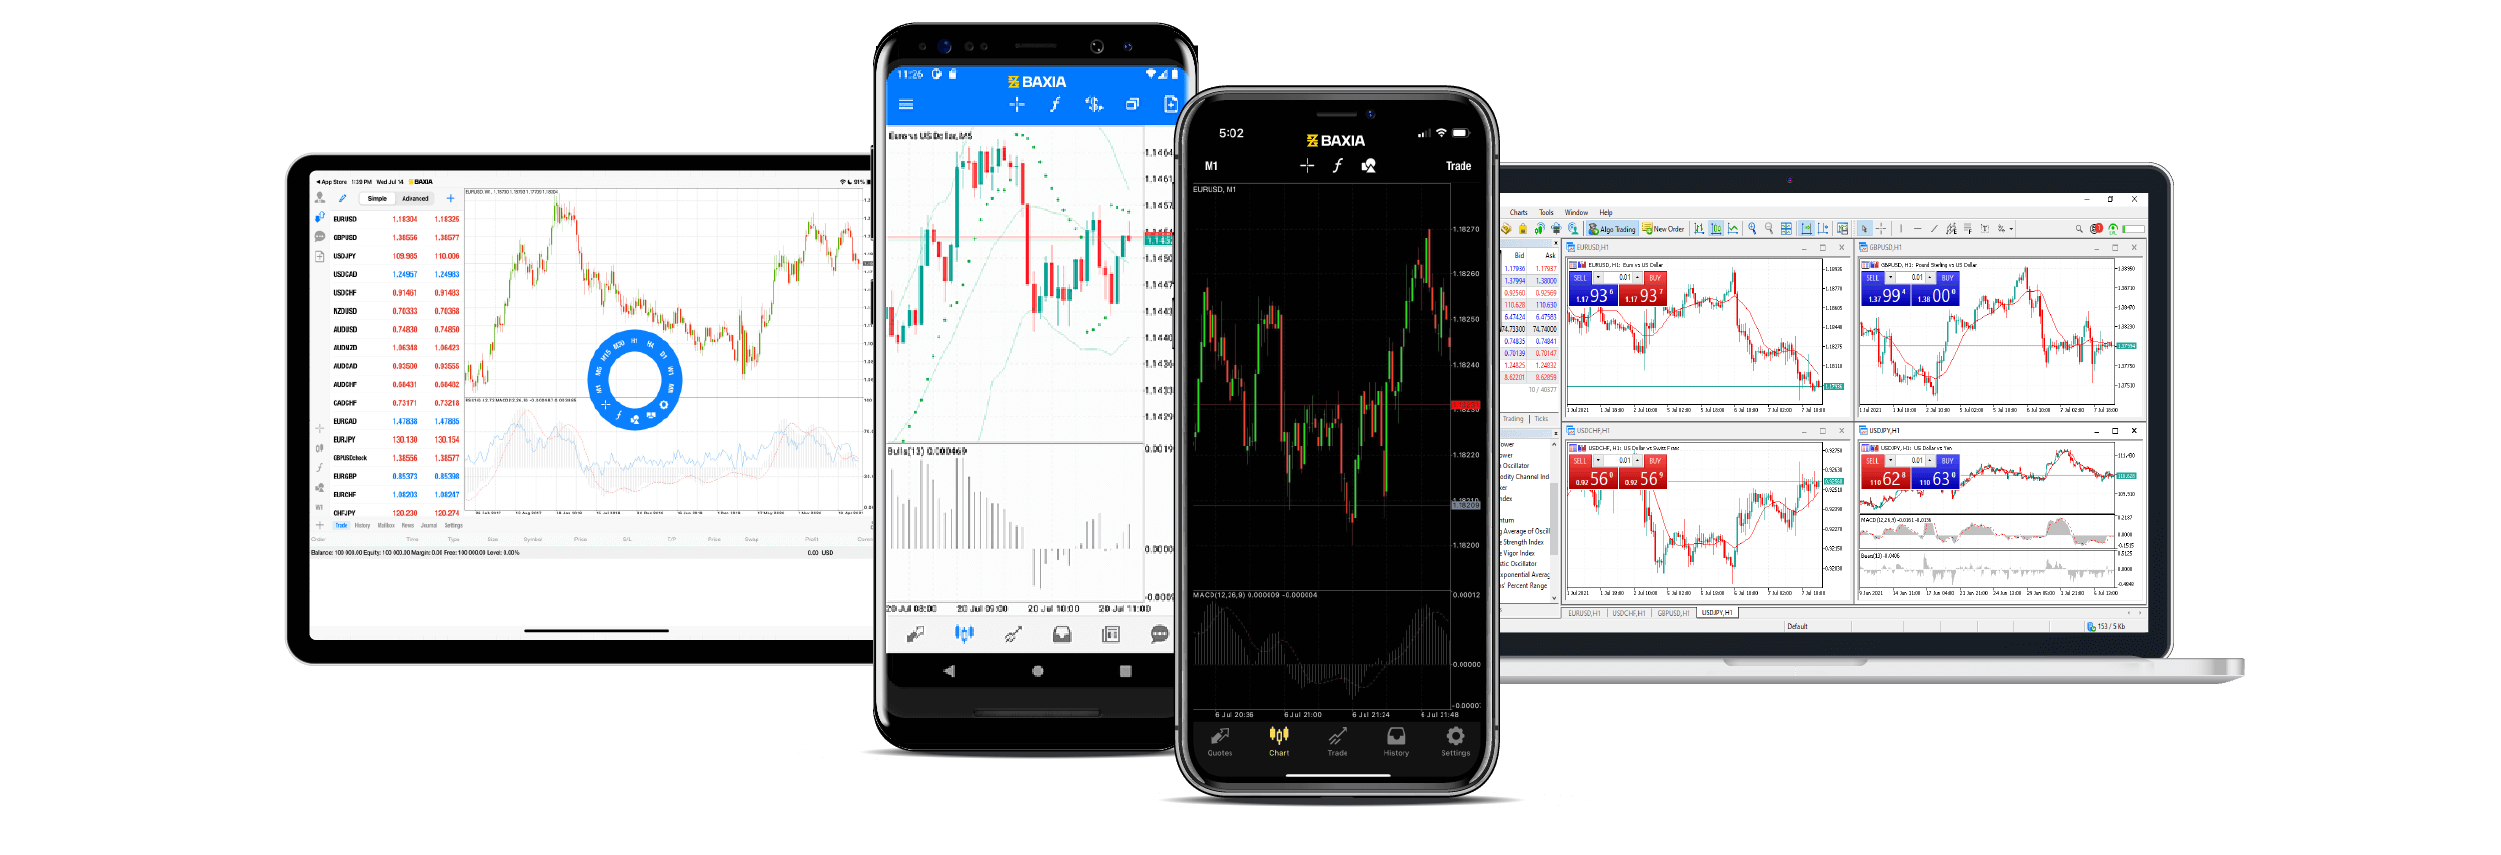 Collection of MetaTrader 4 trading platforms including iPad, Android, iPhone, and PC for MetaTrader 4 (MT4) and MetaTrader 5 (MT5)